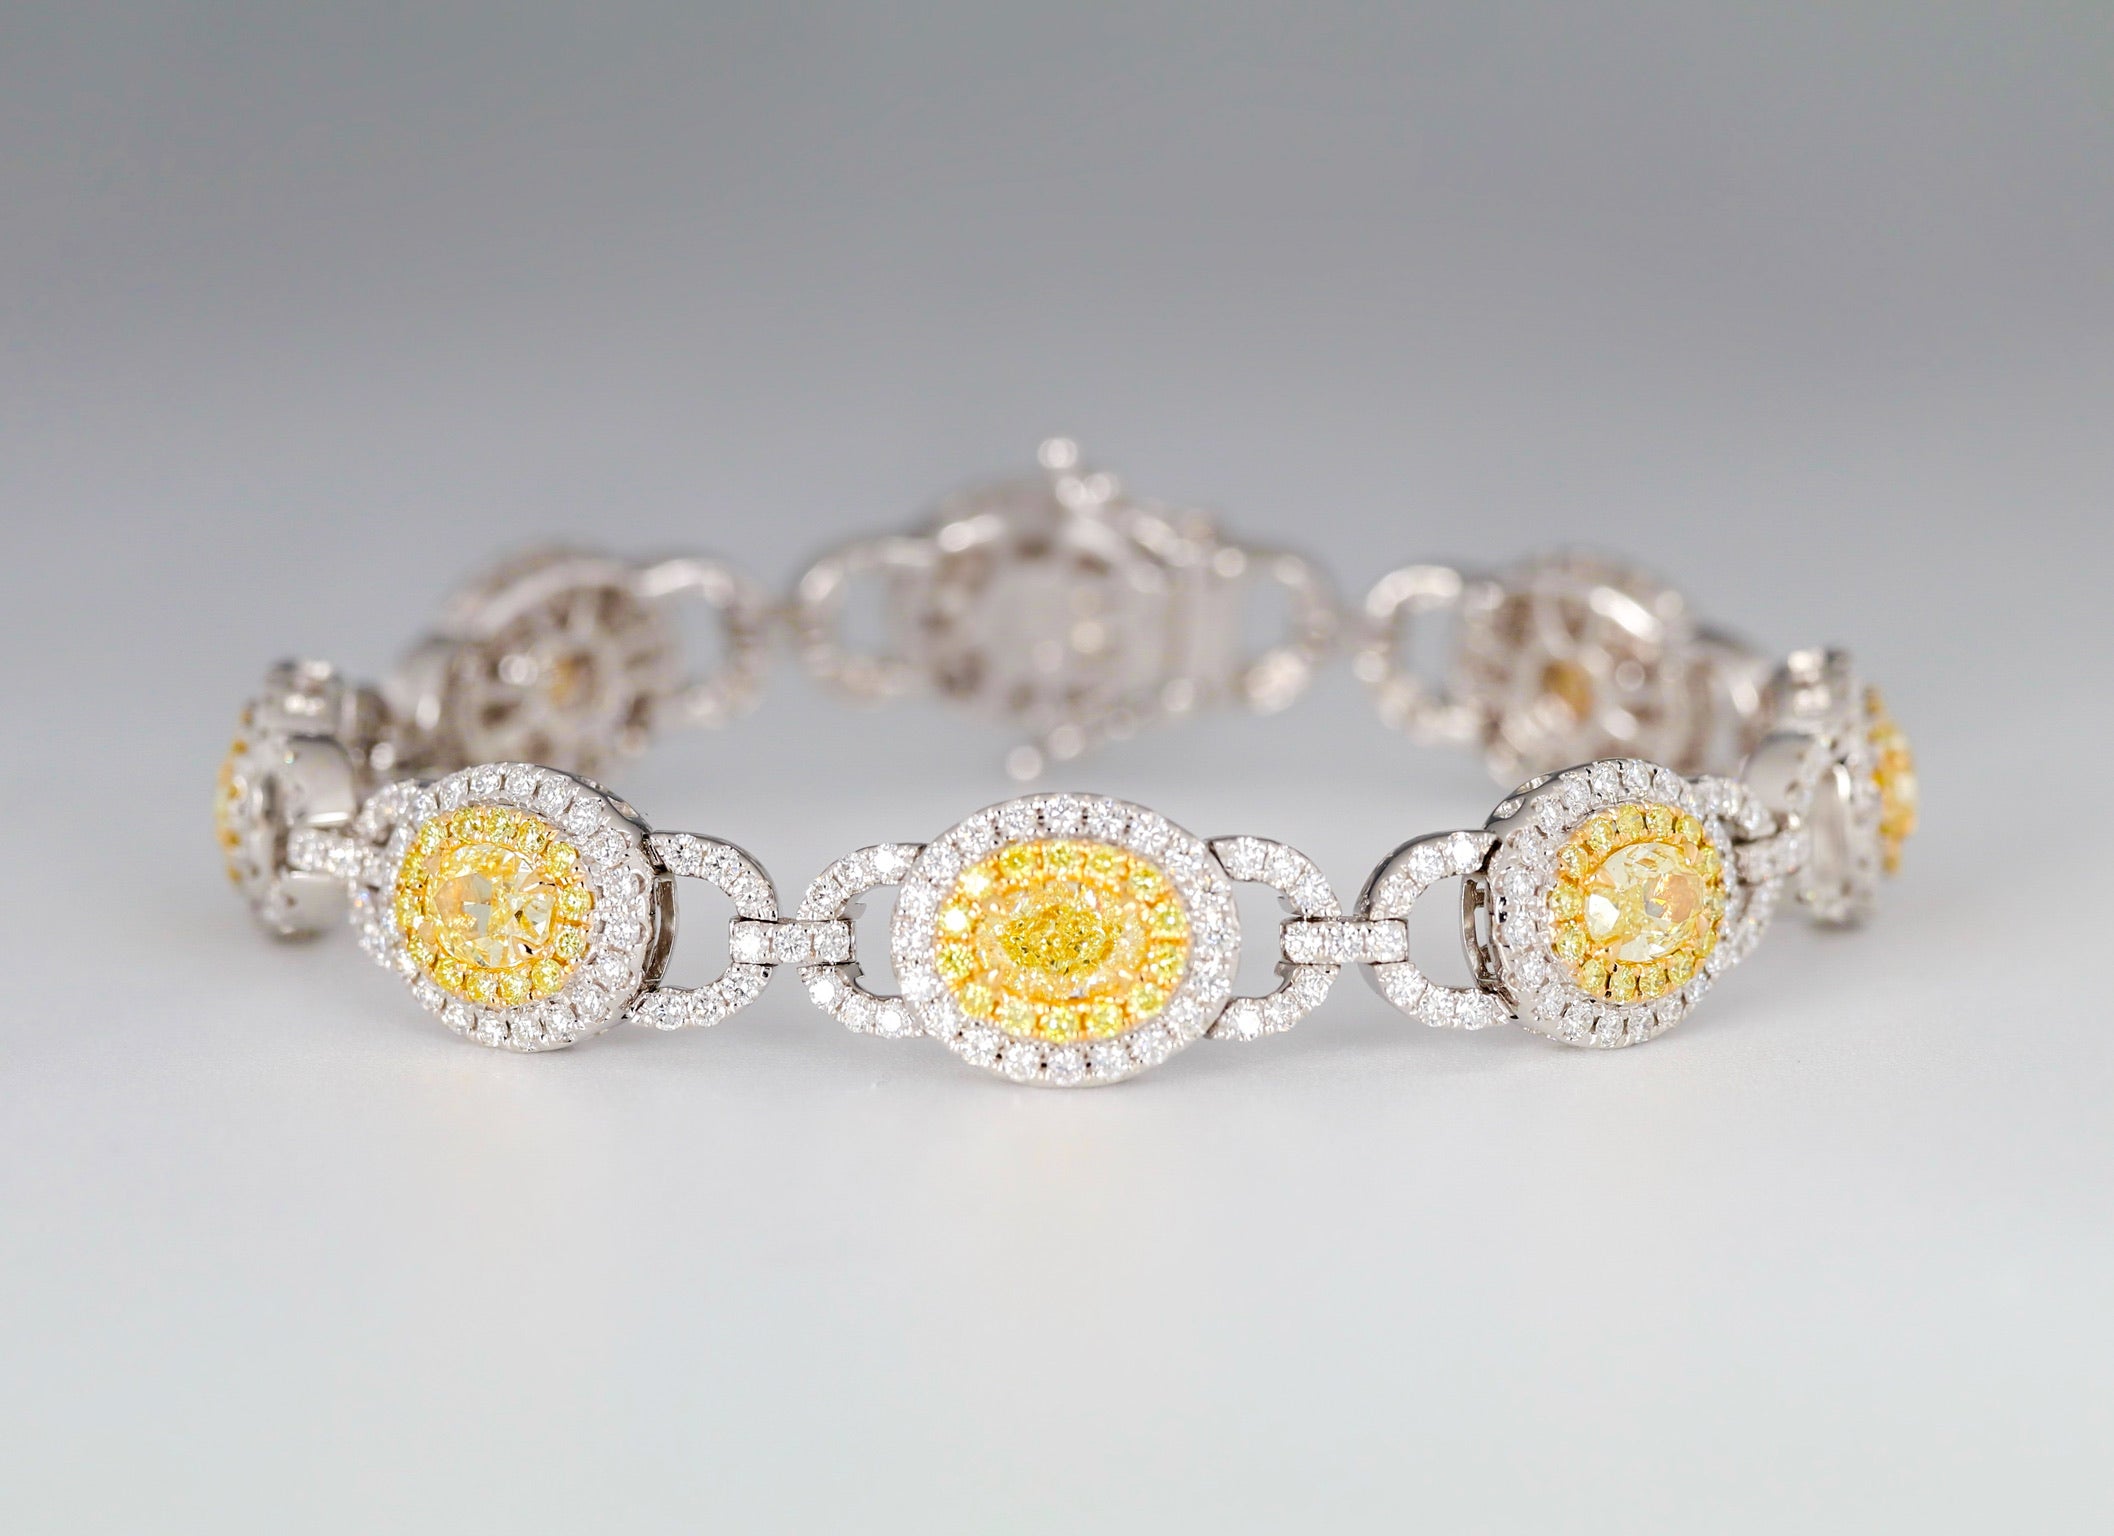 10.89 Carat Oval-Cut Yellow and White Diamond Bracelet, Set in 18K White Gold. For Sale